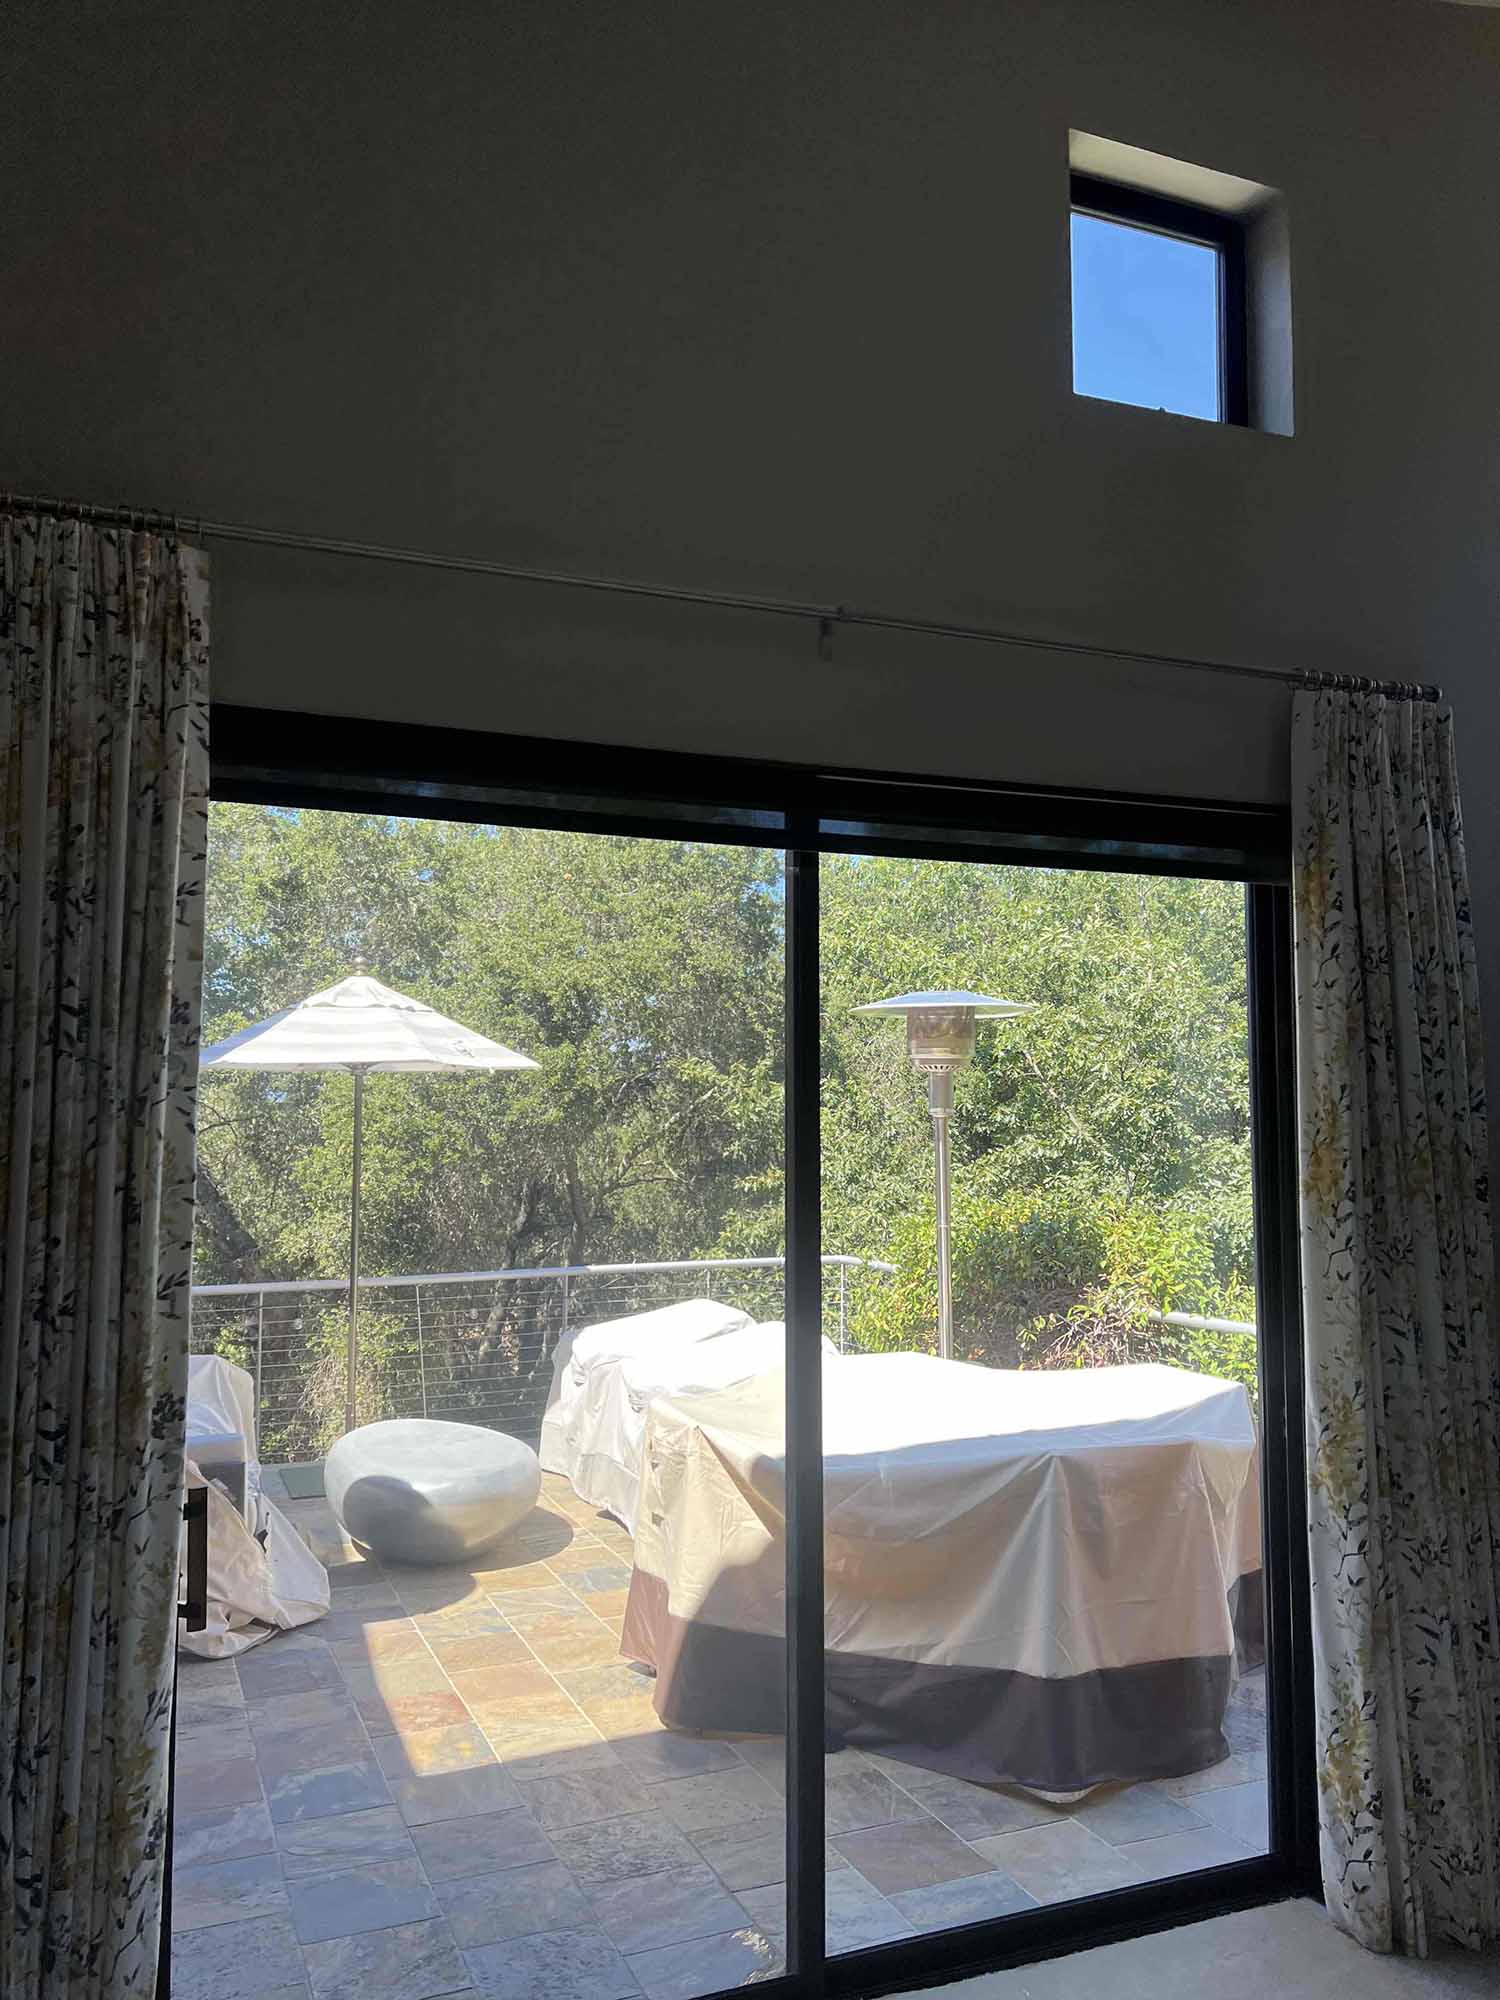 Sun Control Window Film for Healdsburg, CA Homes, installed by ClimatePro.